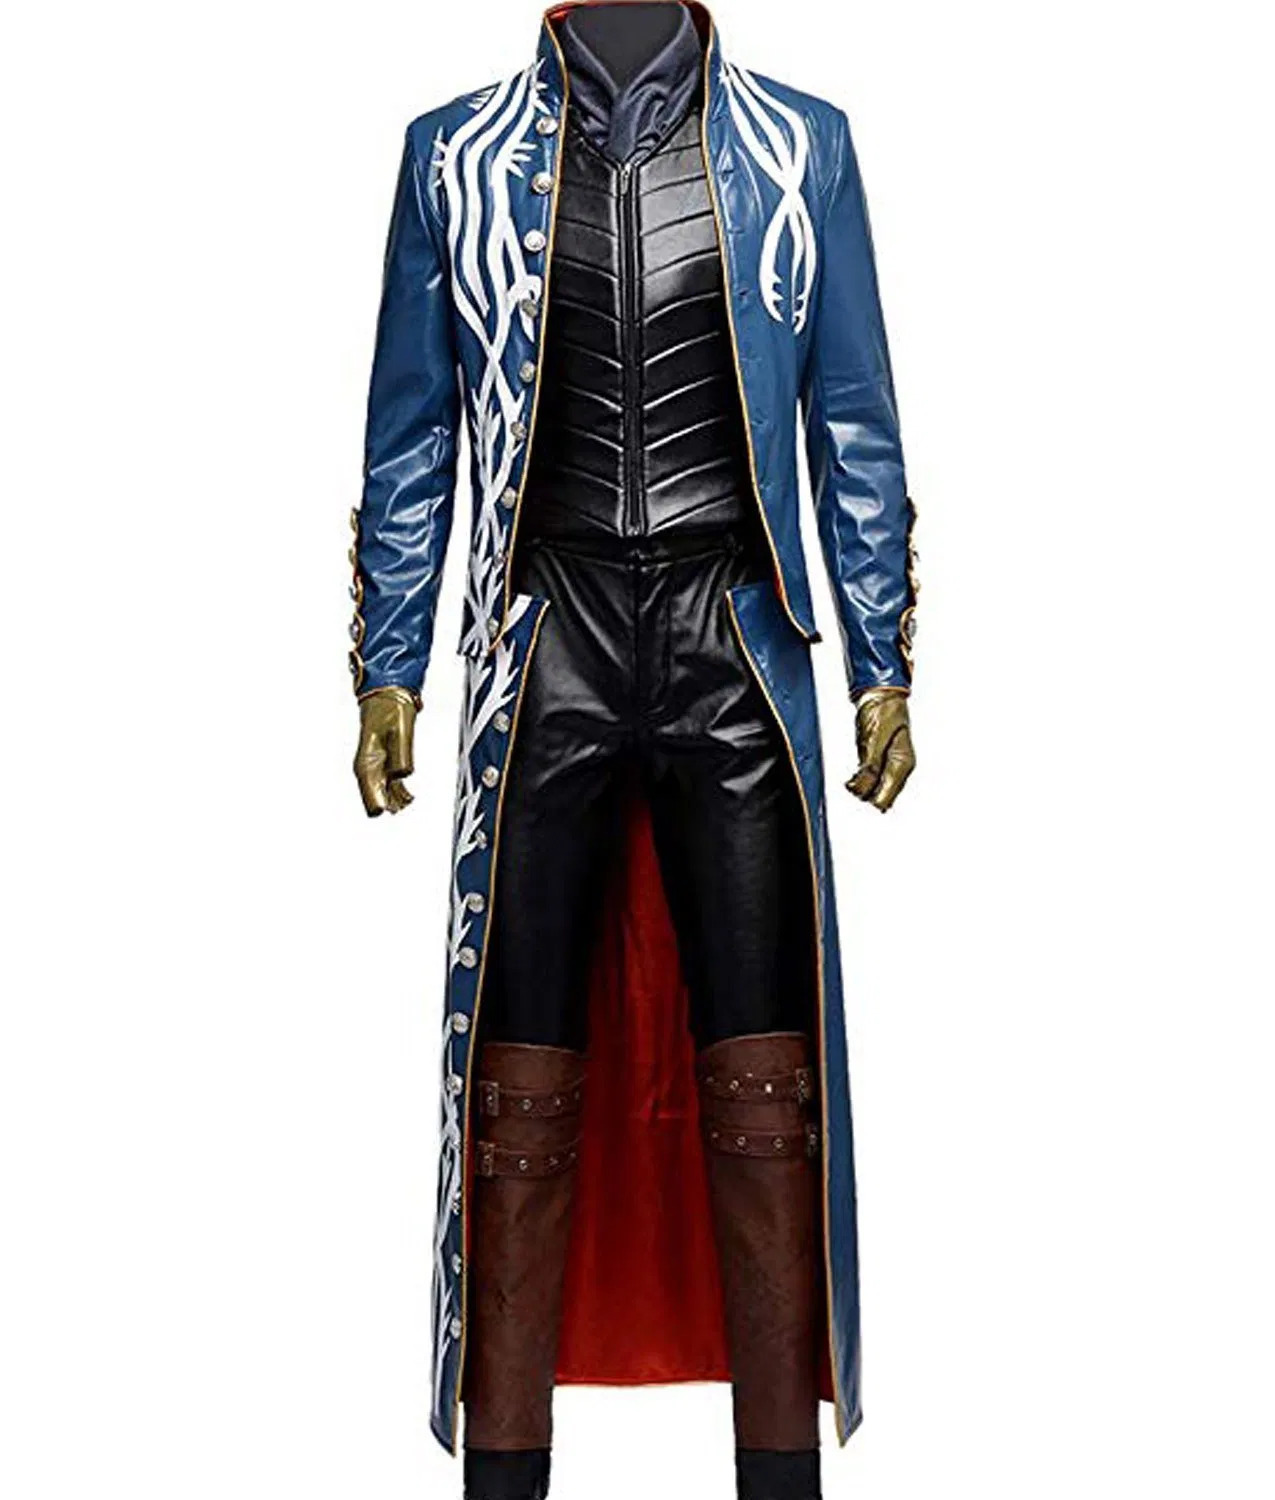 DEVIL MAY CRY 5 DANTE LEATHER TRENCH COAT